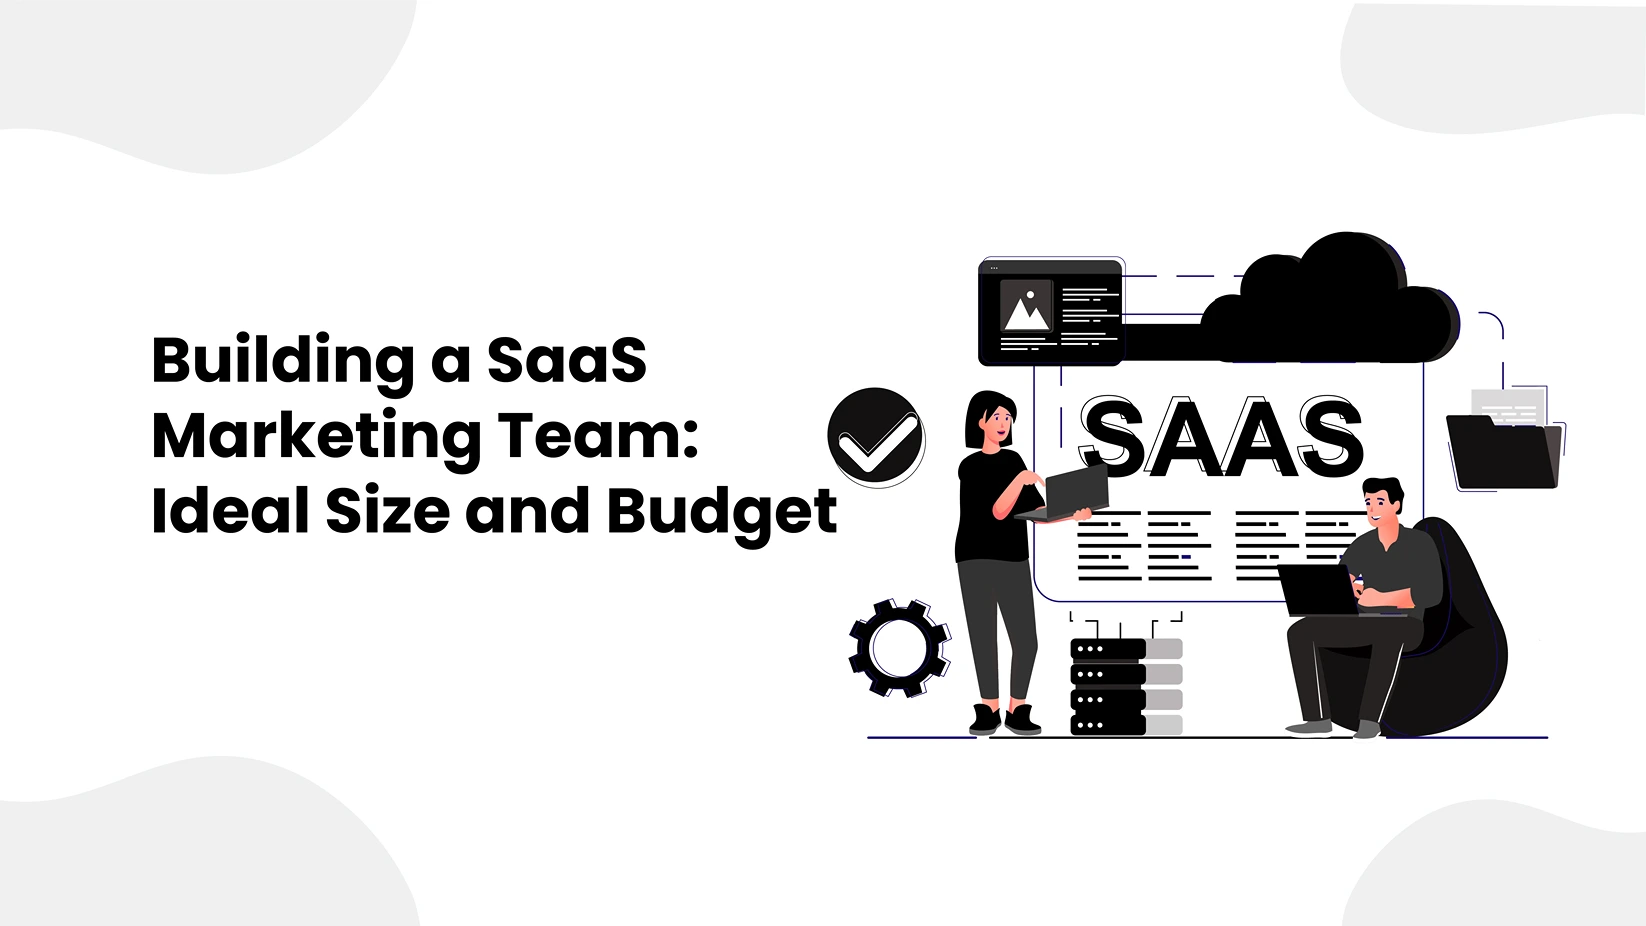 Building a SaaS Marketing Team: Ideal Size and Budget